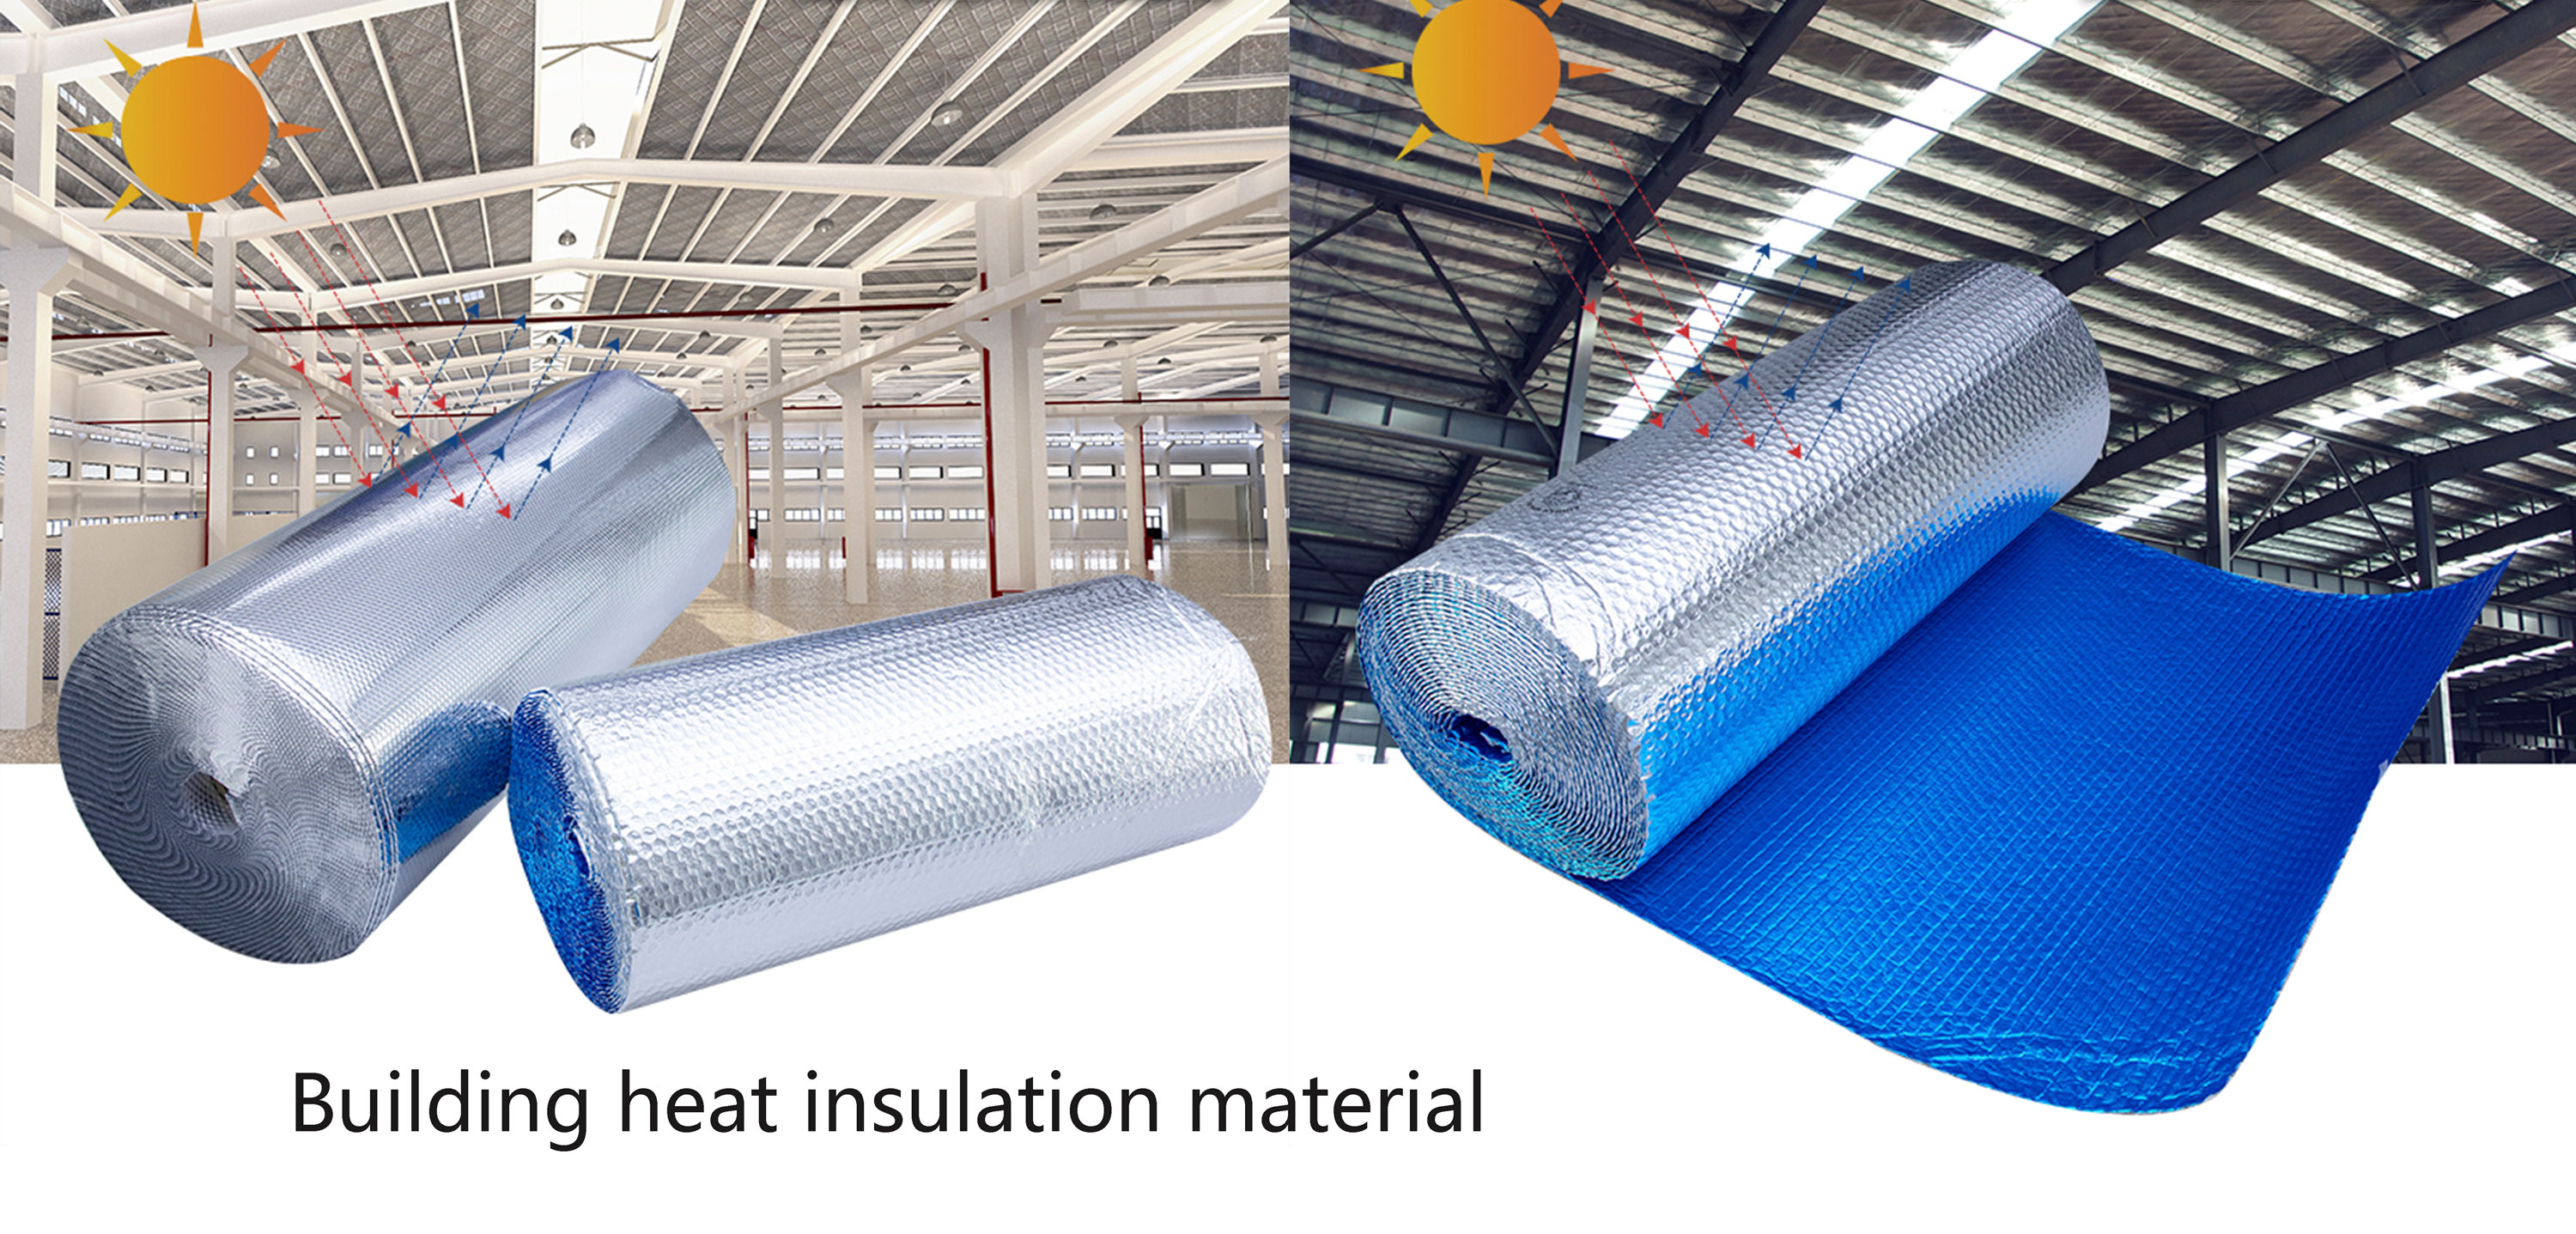 Building heat insulation material